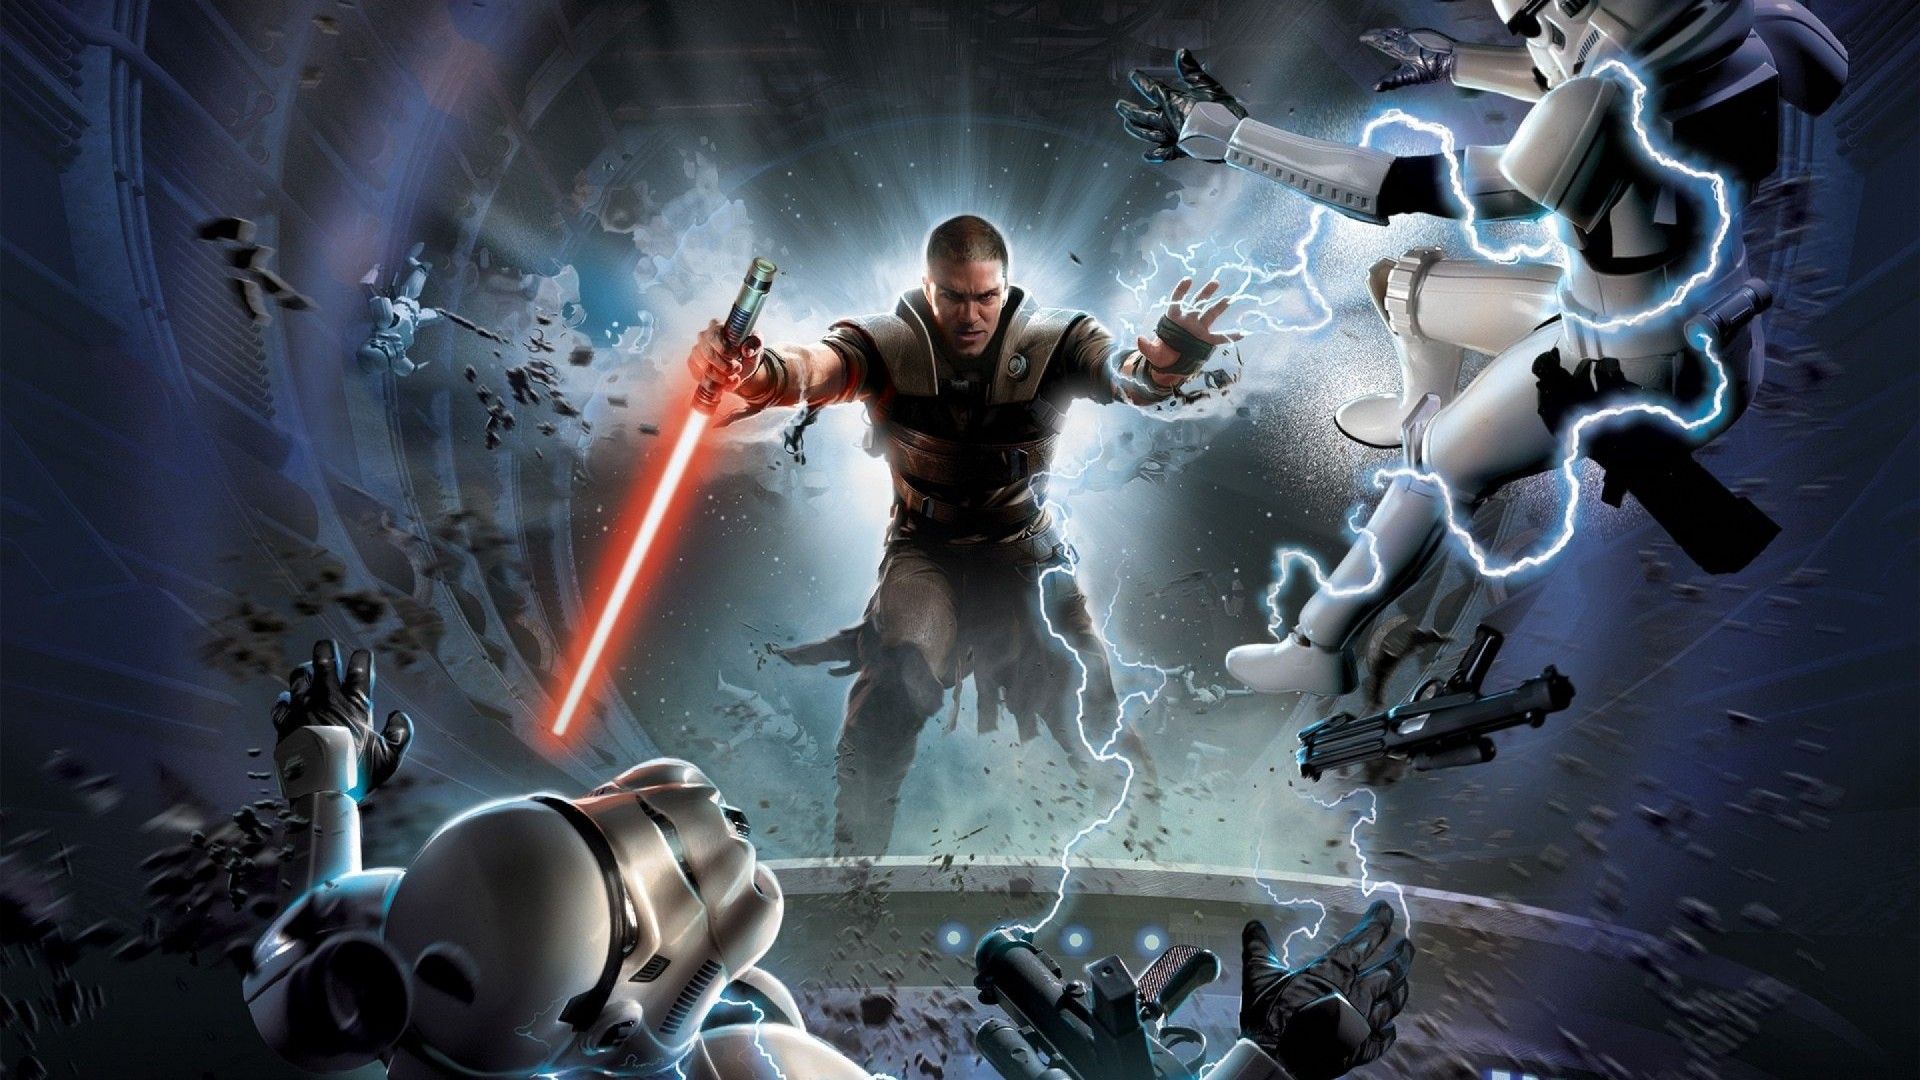 Star Wars The Force Unleashed Video Game Ultra HD Wallpaper, Wallpaper13.com